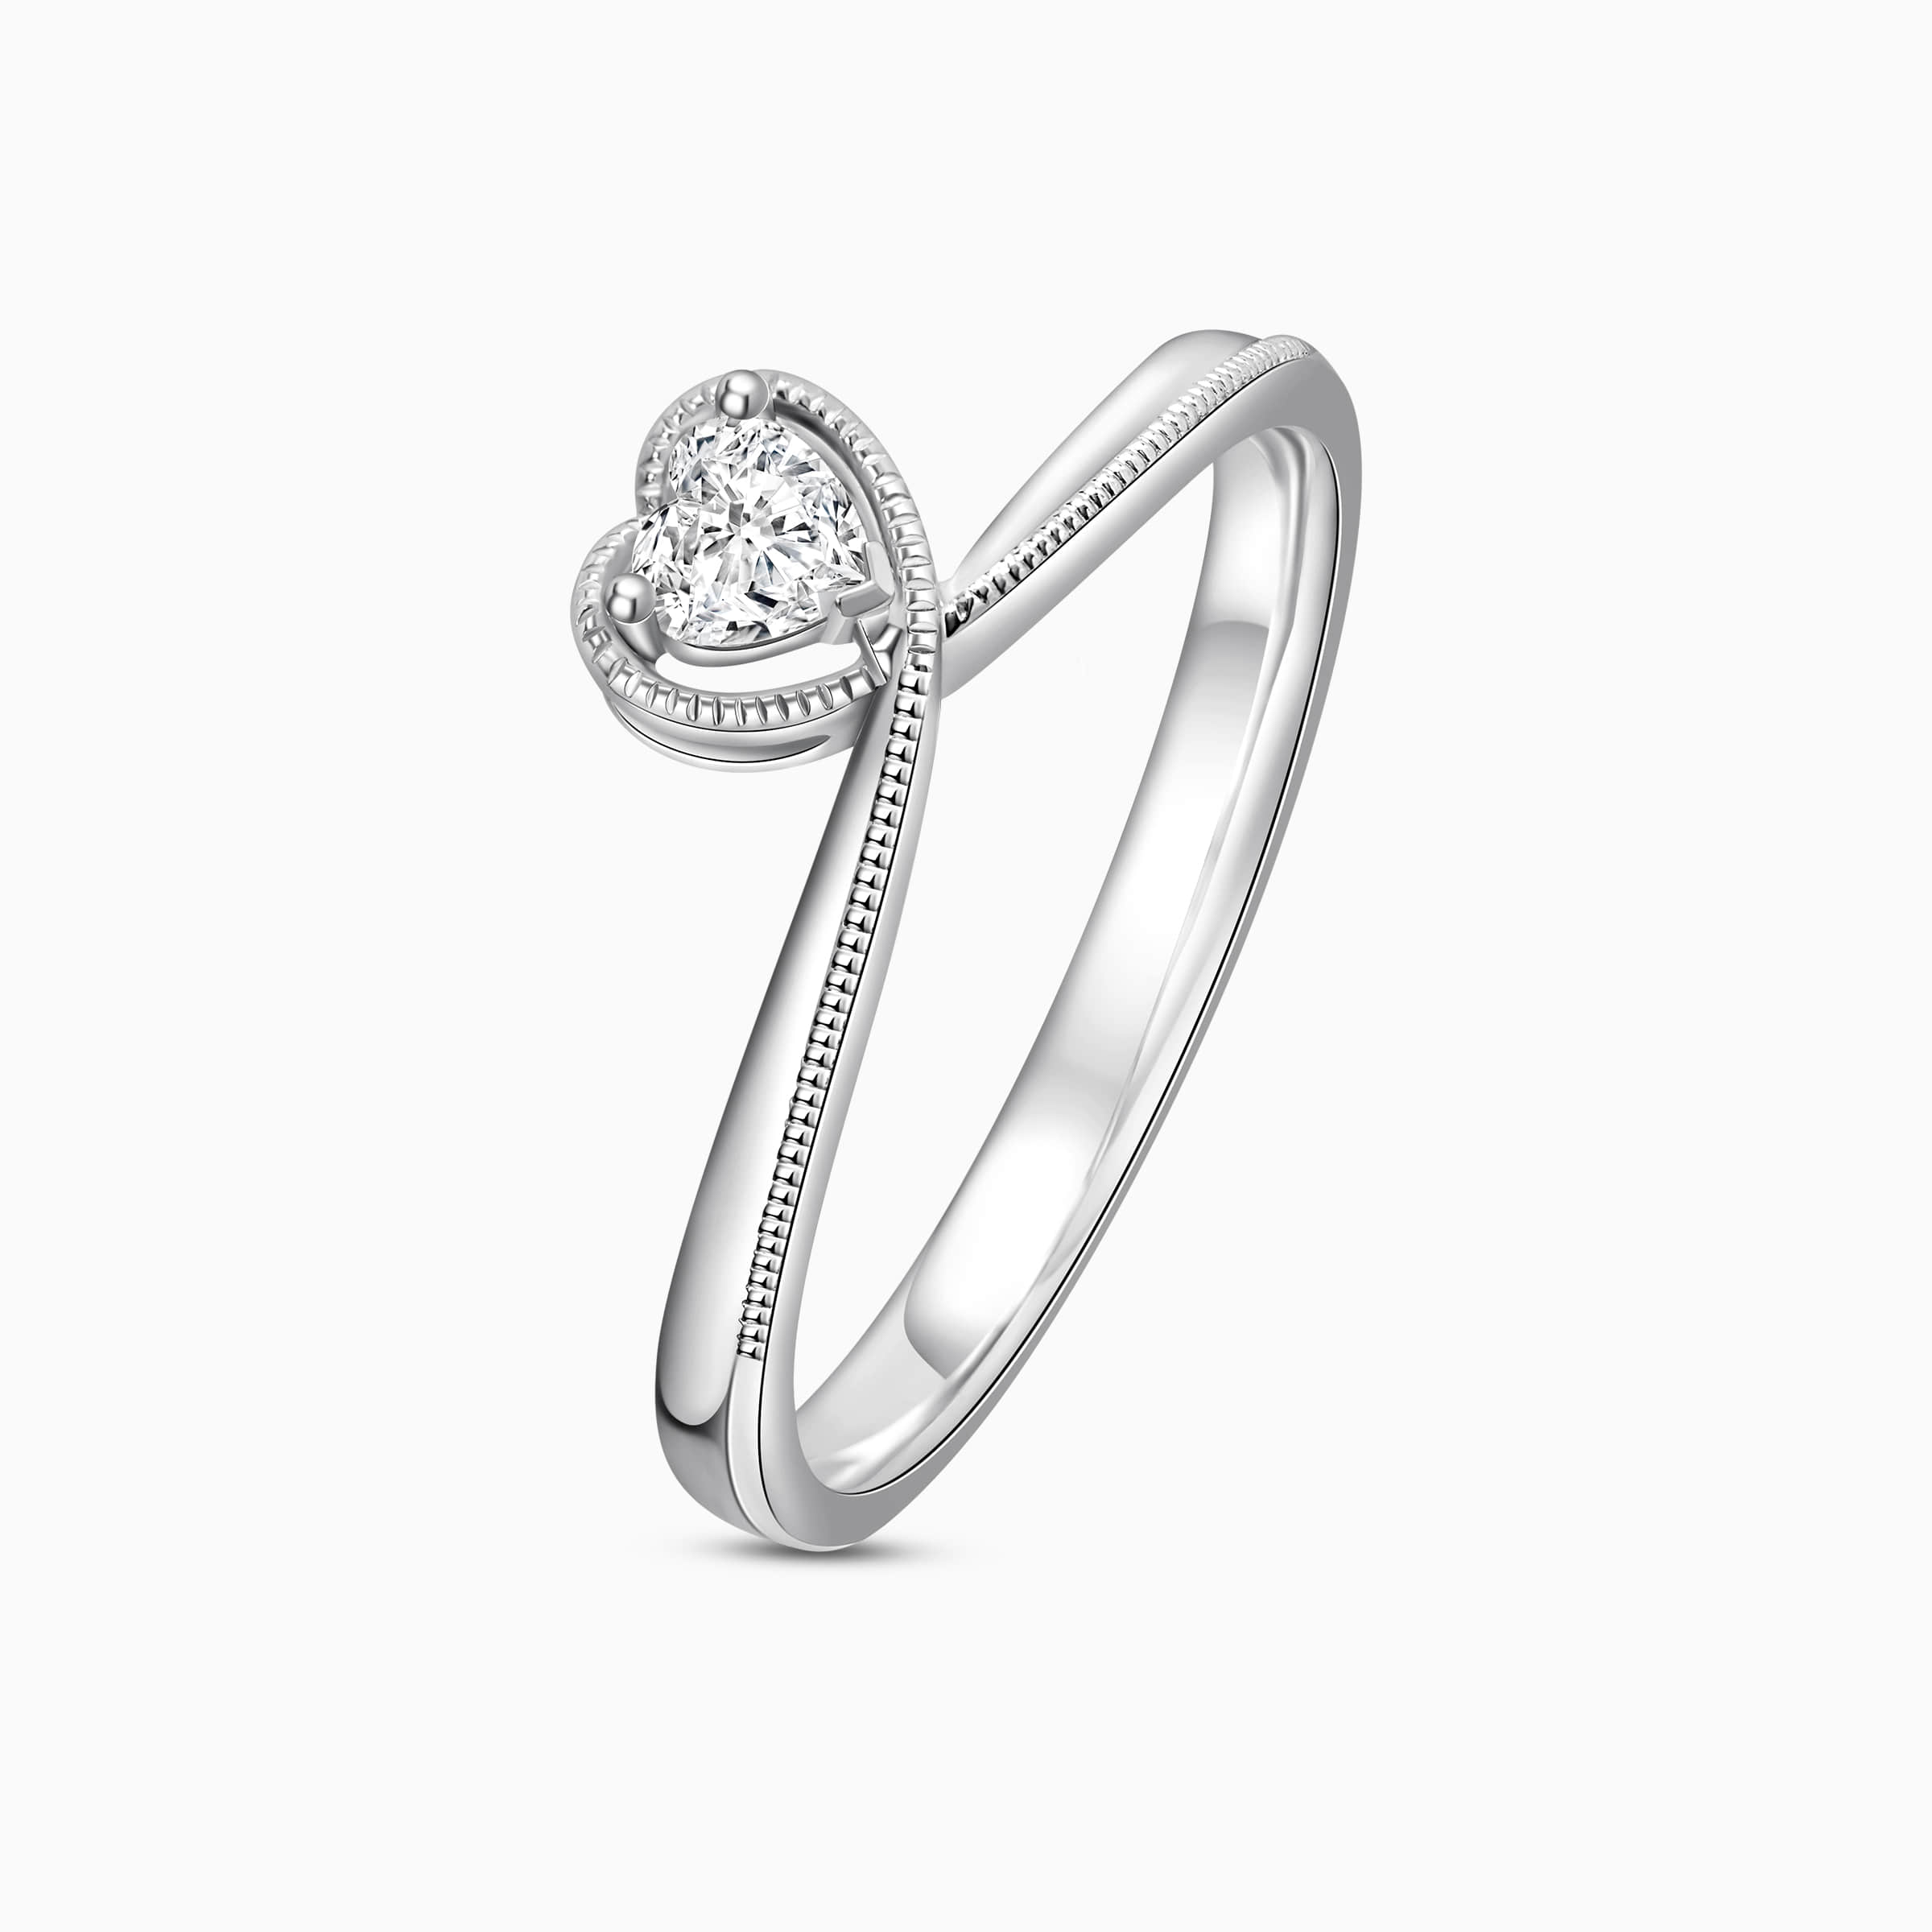 Darry Ring heart shaped promise ring top view